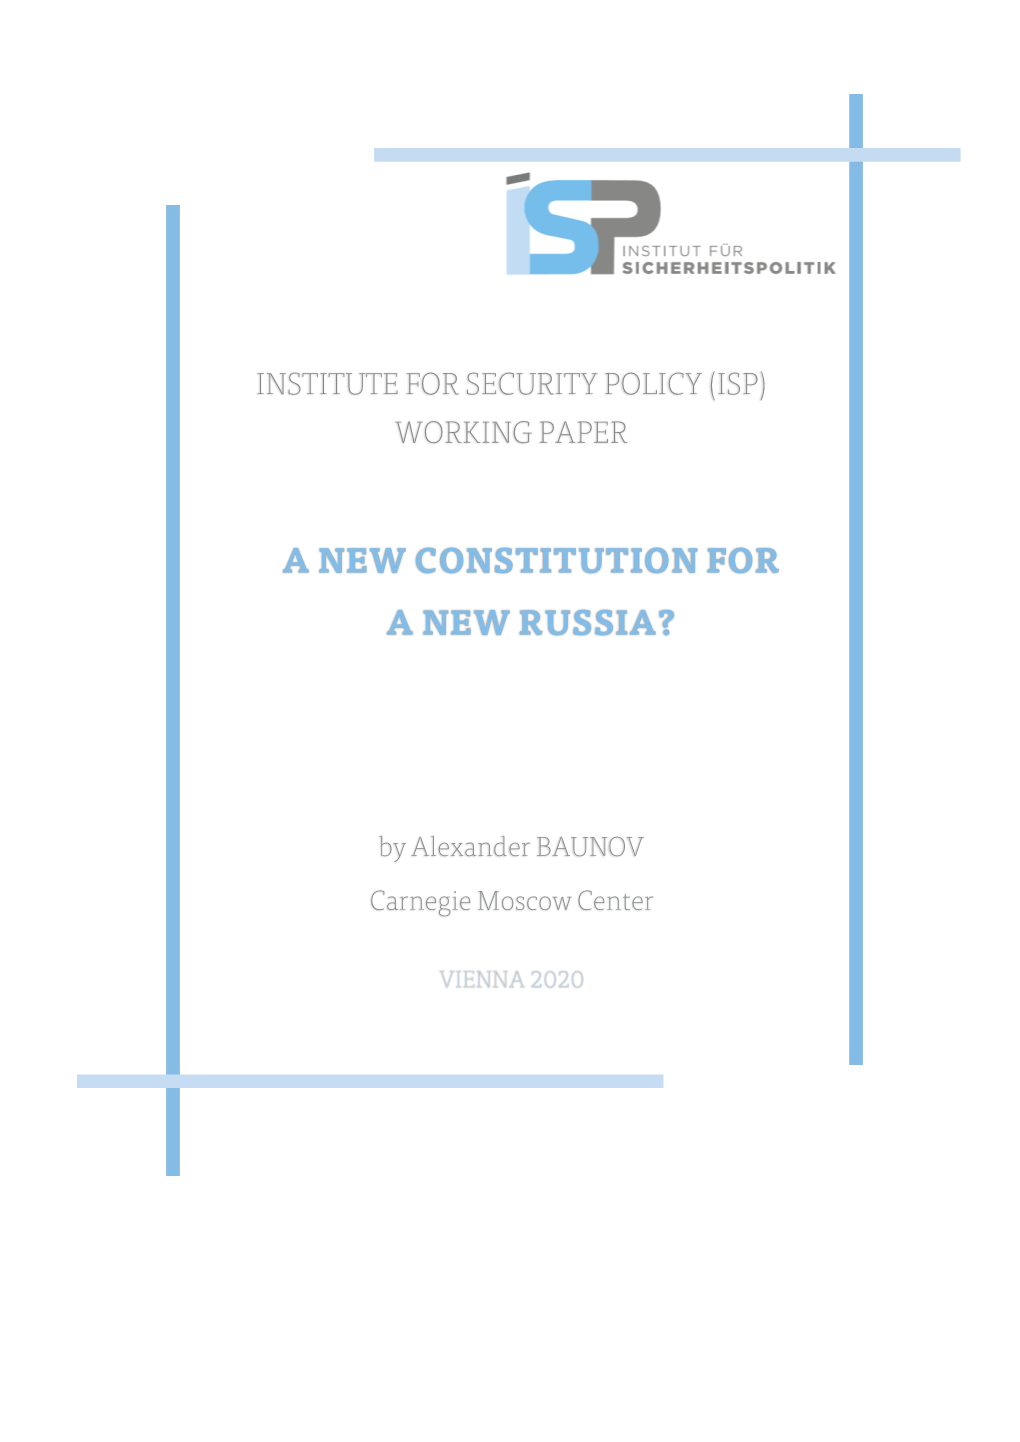 Alexander BAUNOV a New Constitution for a New Russia?